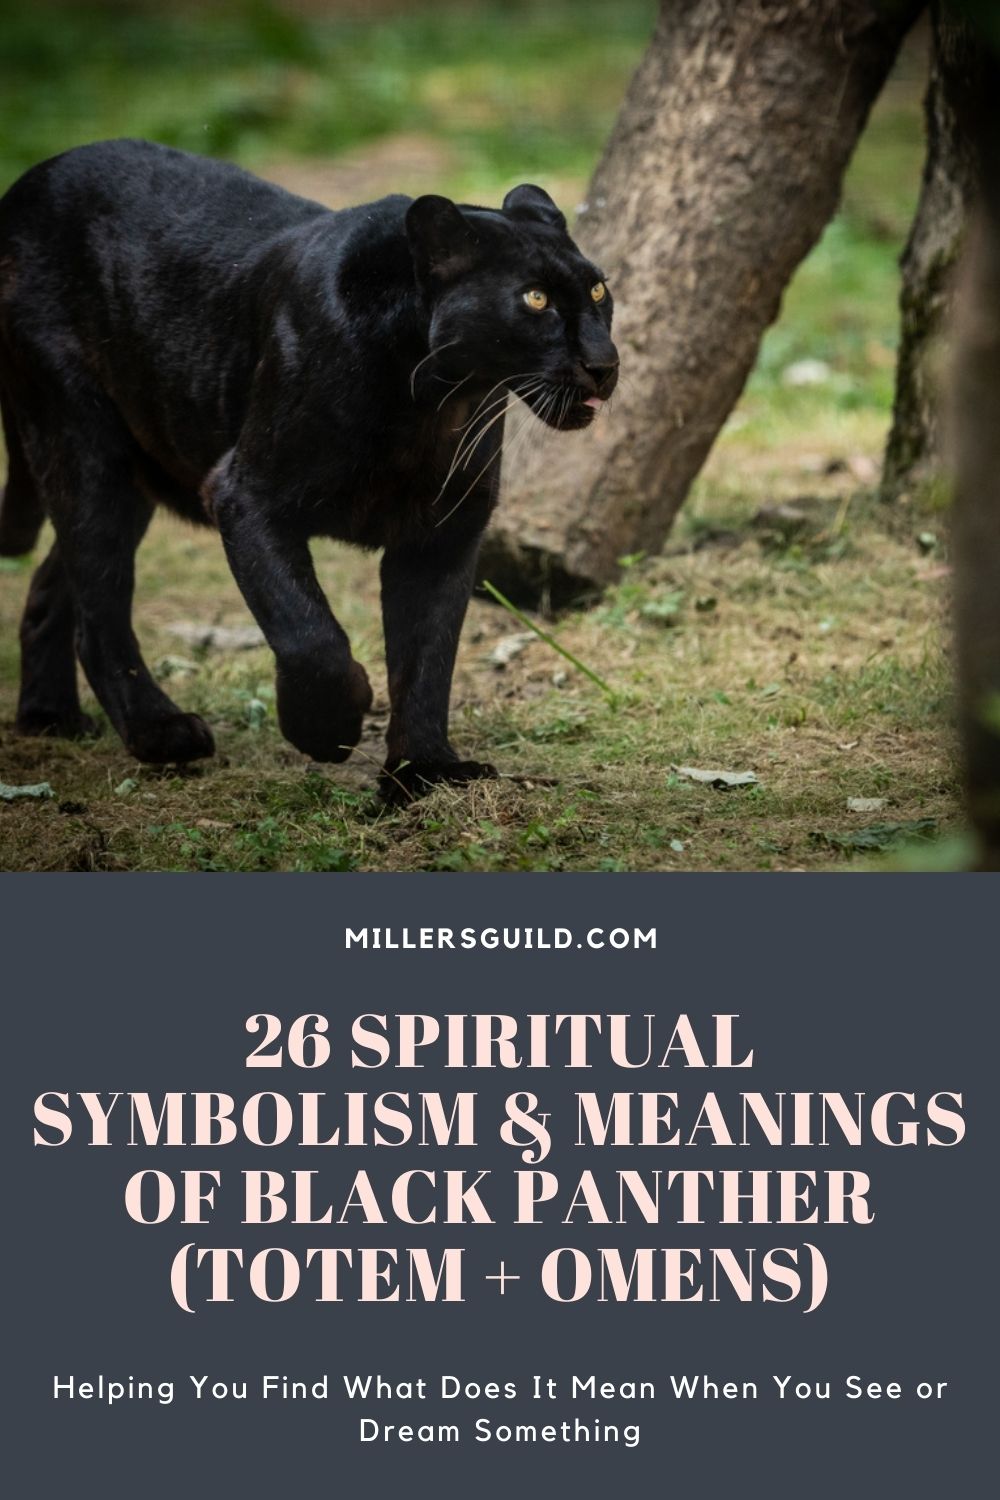 26 Spiritual Symbolism & Meanings of Black Panther (Totem + Omens)